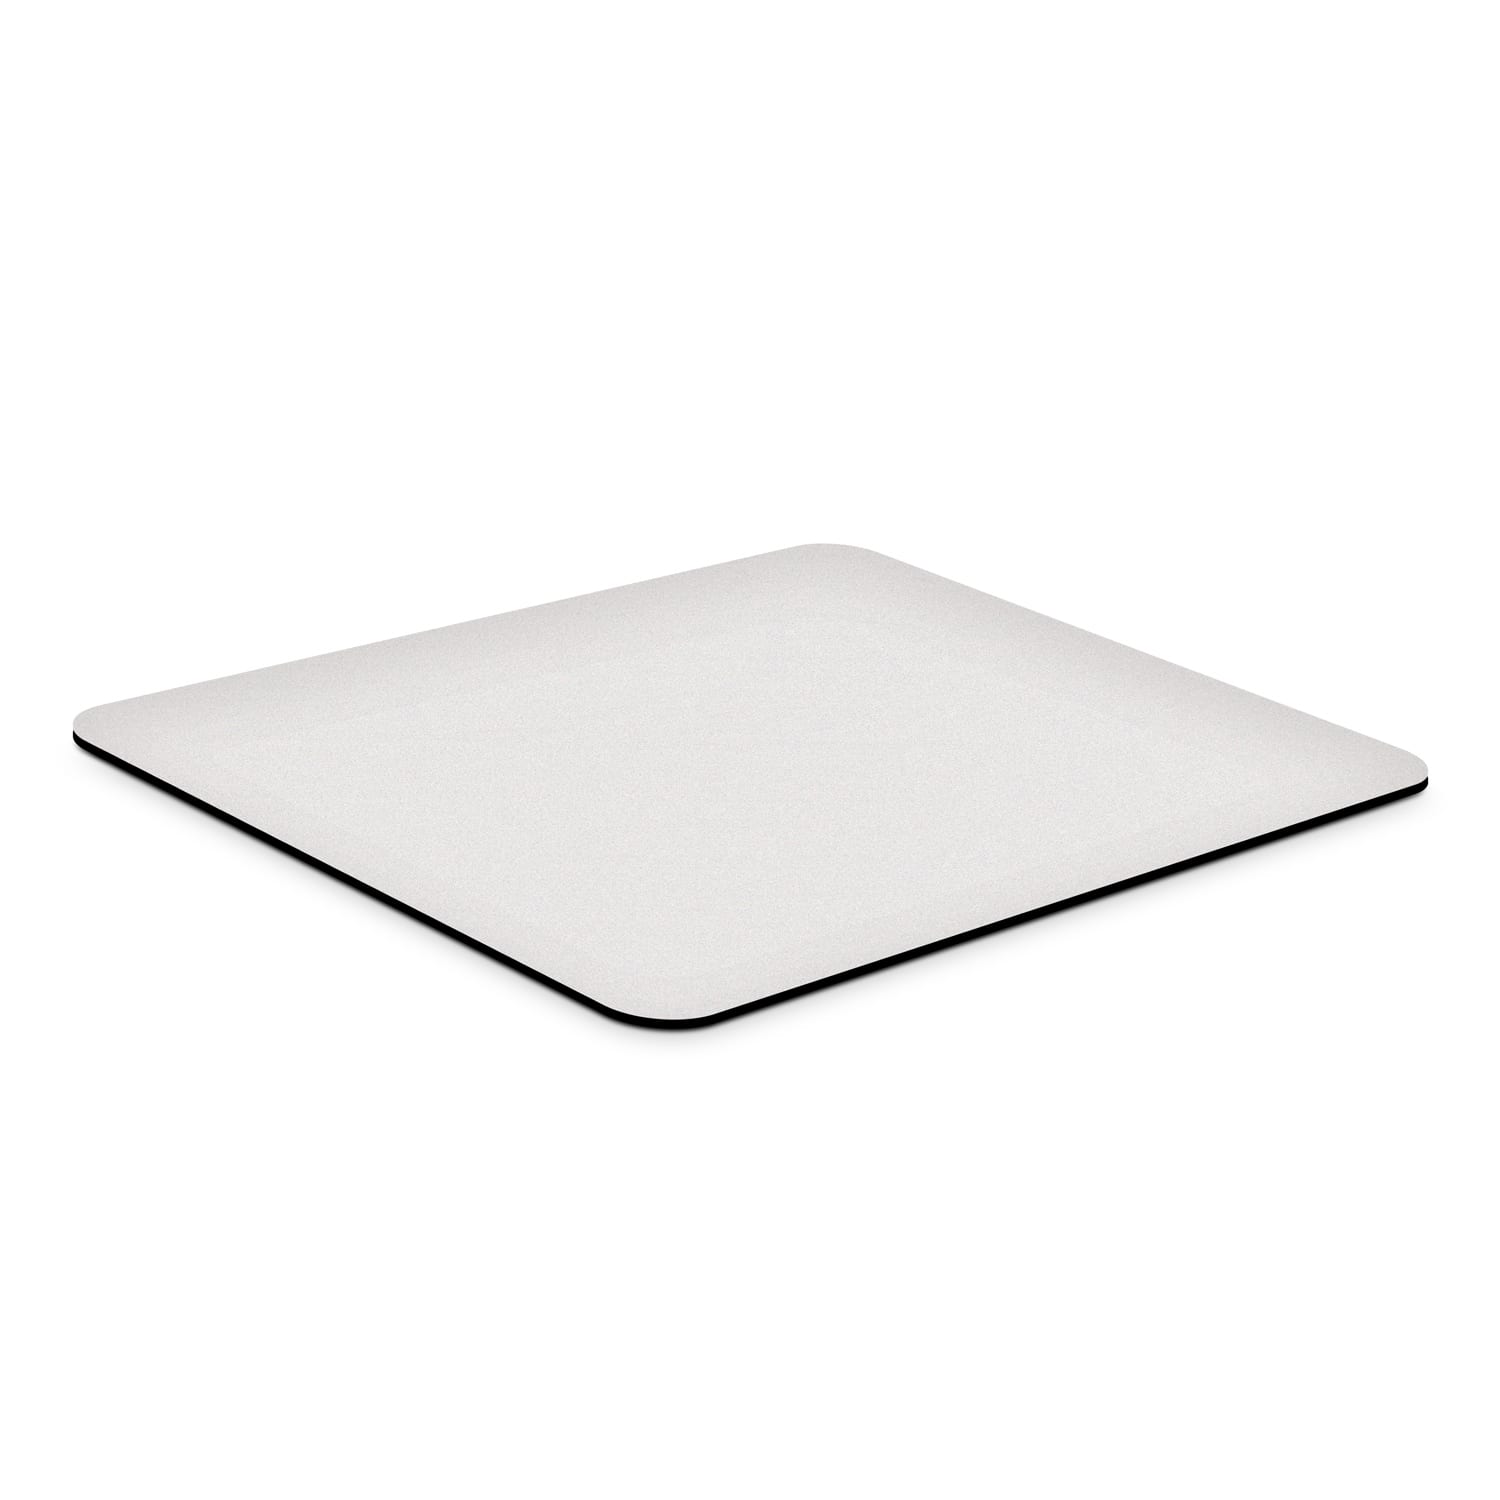 Desk Items 4-in-1 Mouse Mat 4-in-1